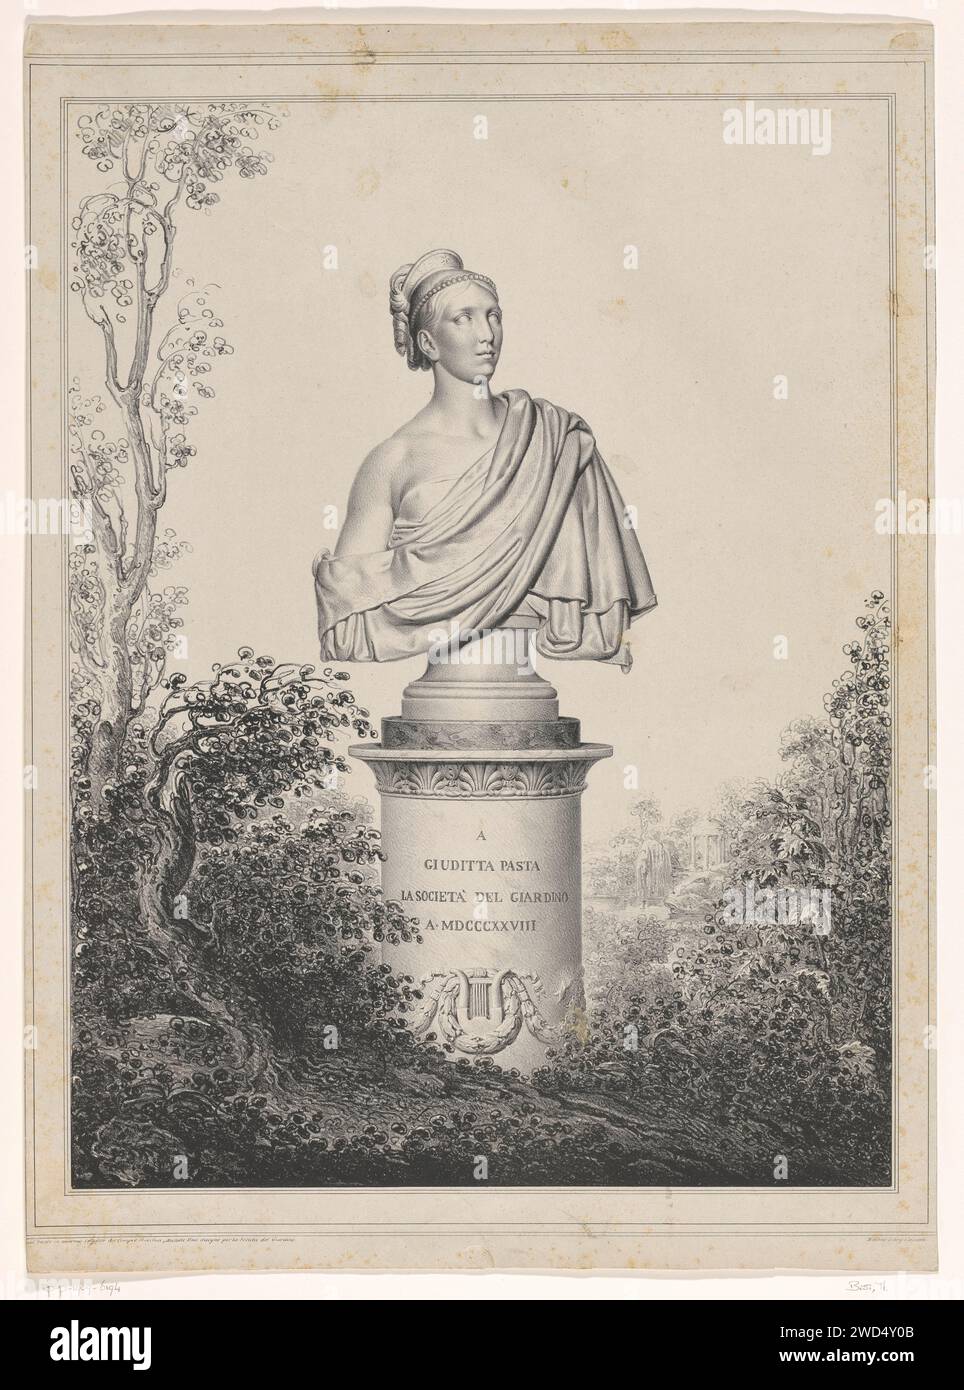 Burial monument of opera singer Giuditta Pasta, Michele Bisi, 1798 - 1874 print Landscape with the grave monument for opera singer Giuditta Pasta. The monument consists of a basement with a portrait bust from Giuditta Pasta. Print Maker: Italy Printer: Milan paper  monument, statue. grave, tomb Stock Photo